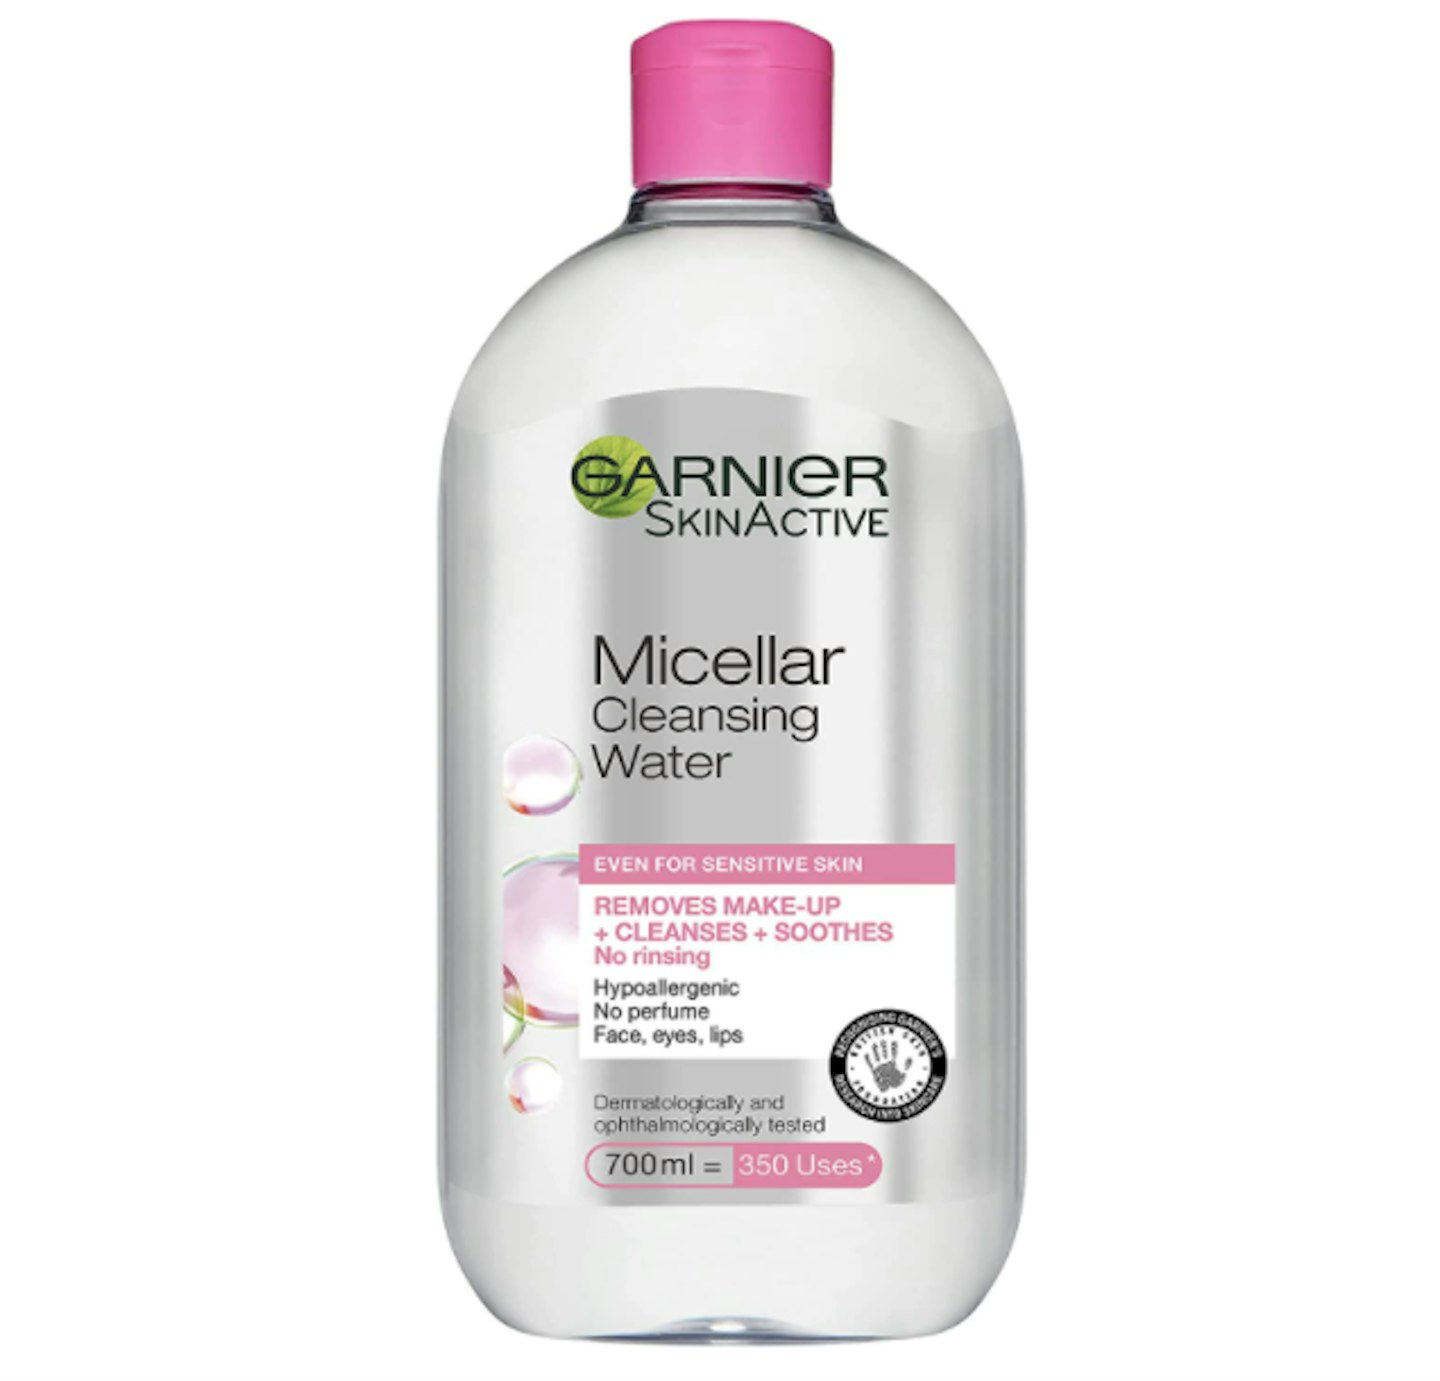 A picture showing the packaging of the featured micellar water product.